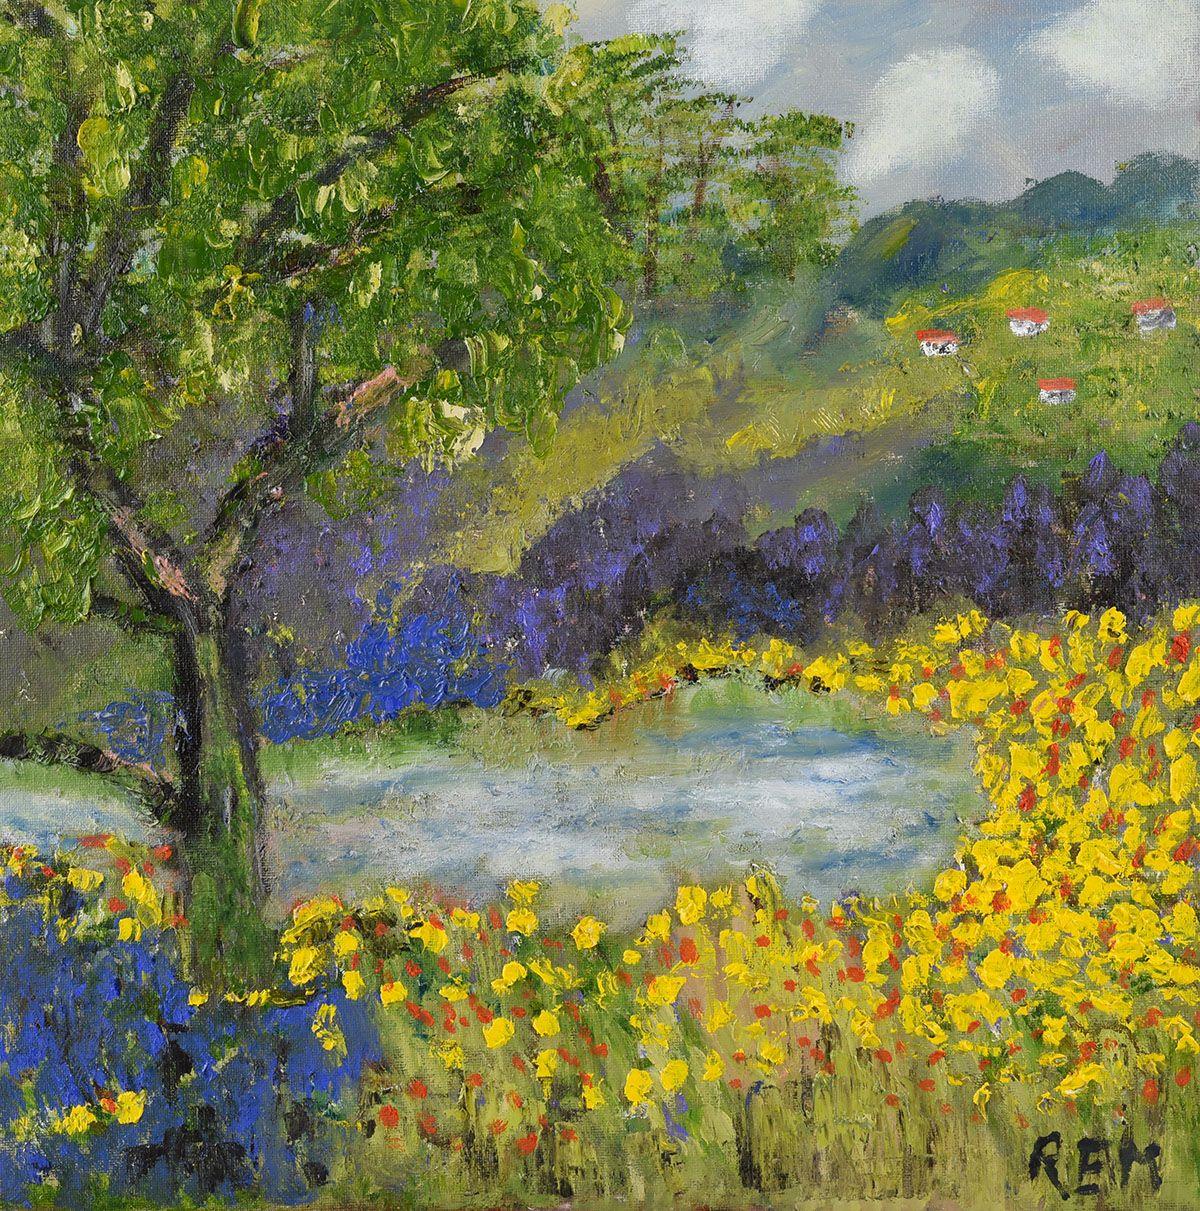 Spring Garden Abstract Landscape with Yellow Flowers and Tree by British Artist - Painting by Rose Elizabeth Moorcroft